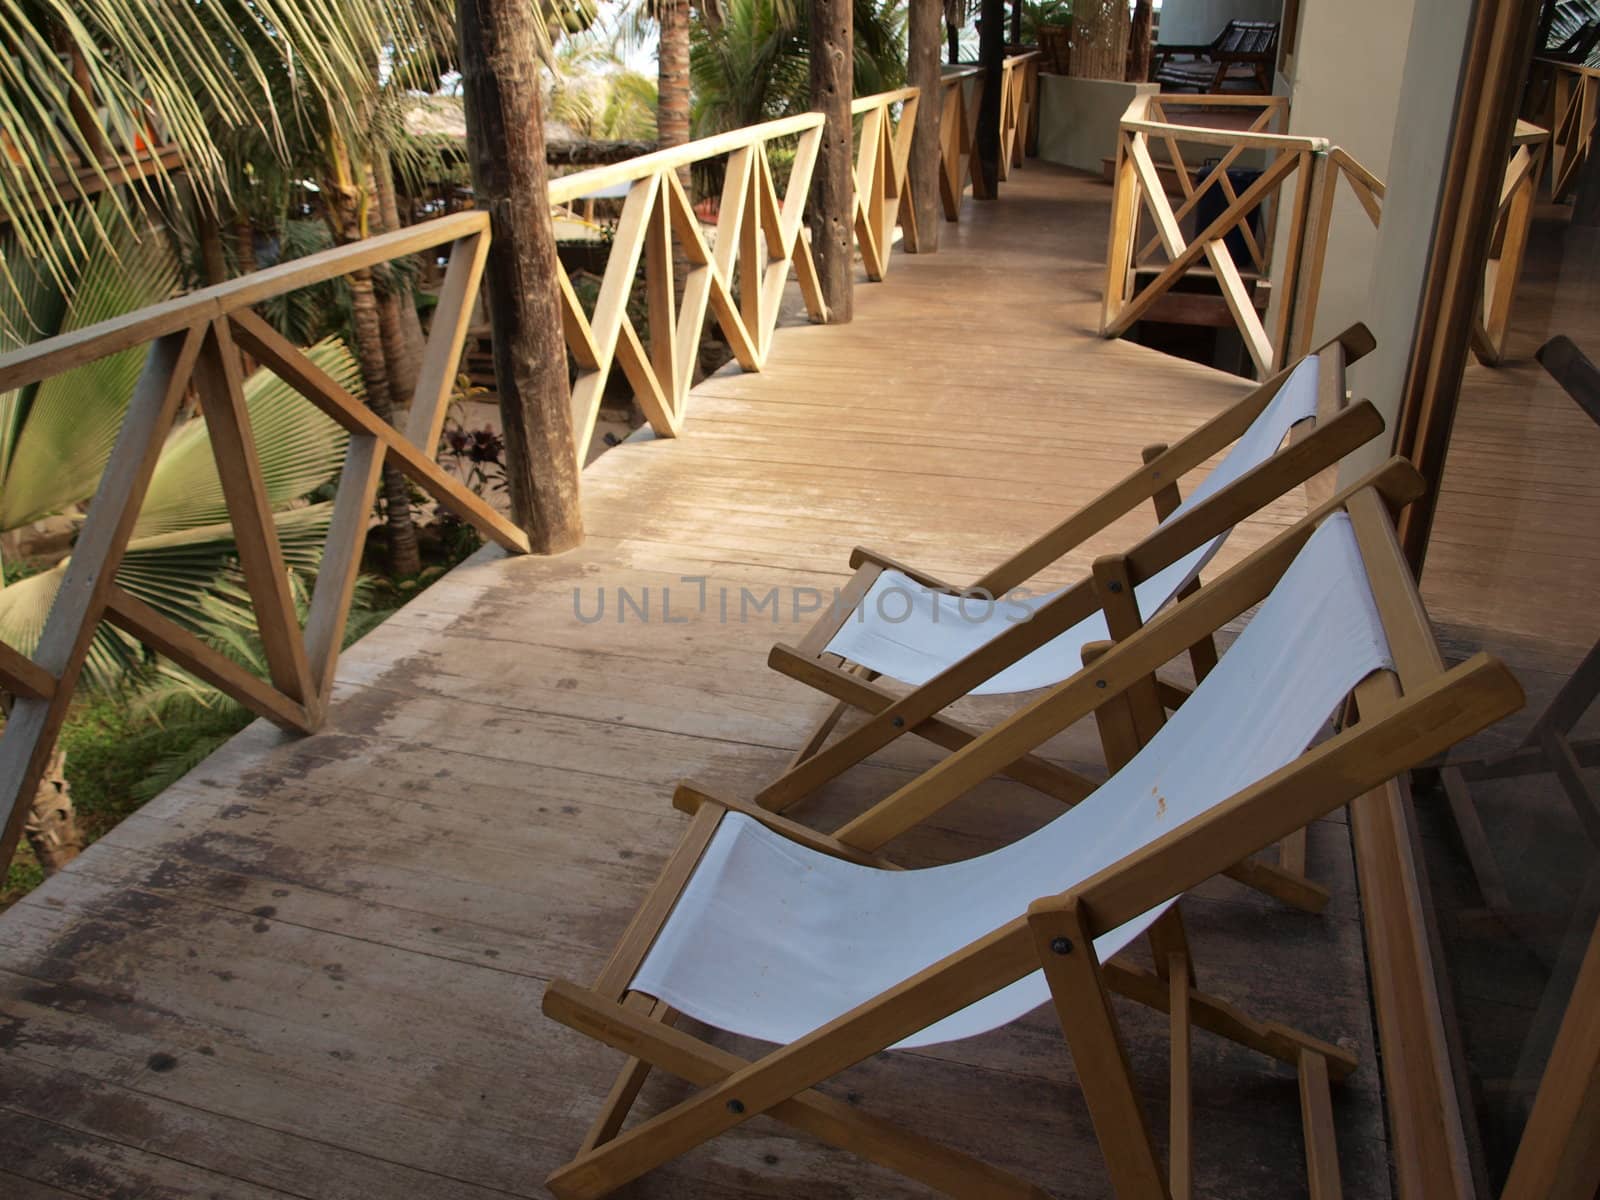 Chairs for suntanning in beach hotel balcony surrounded with palm trees